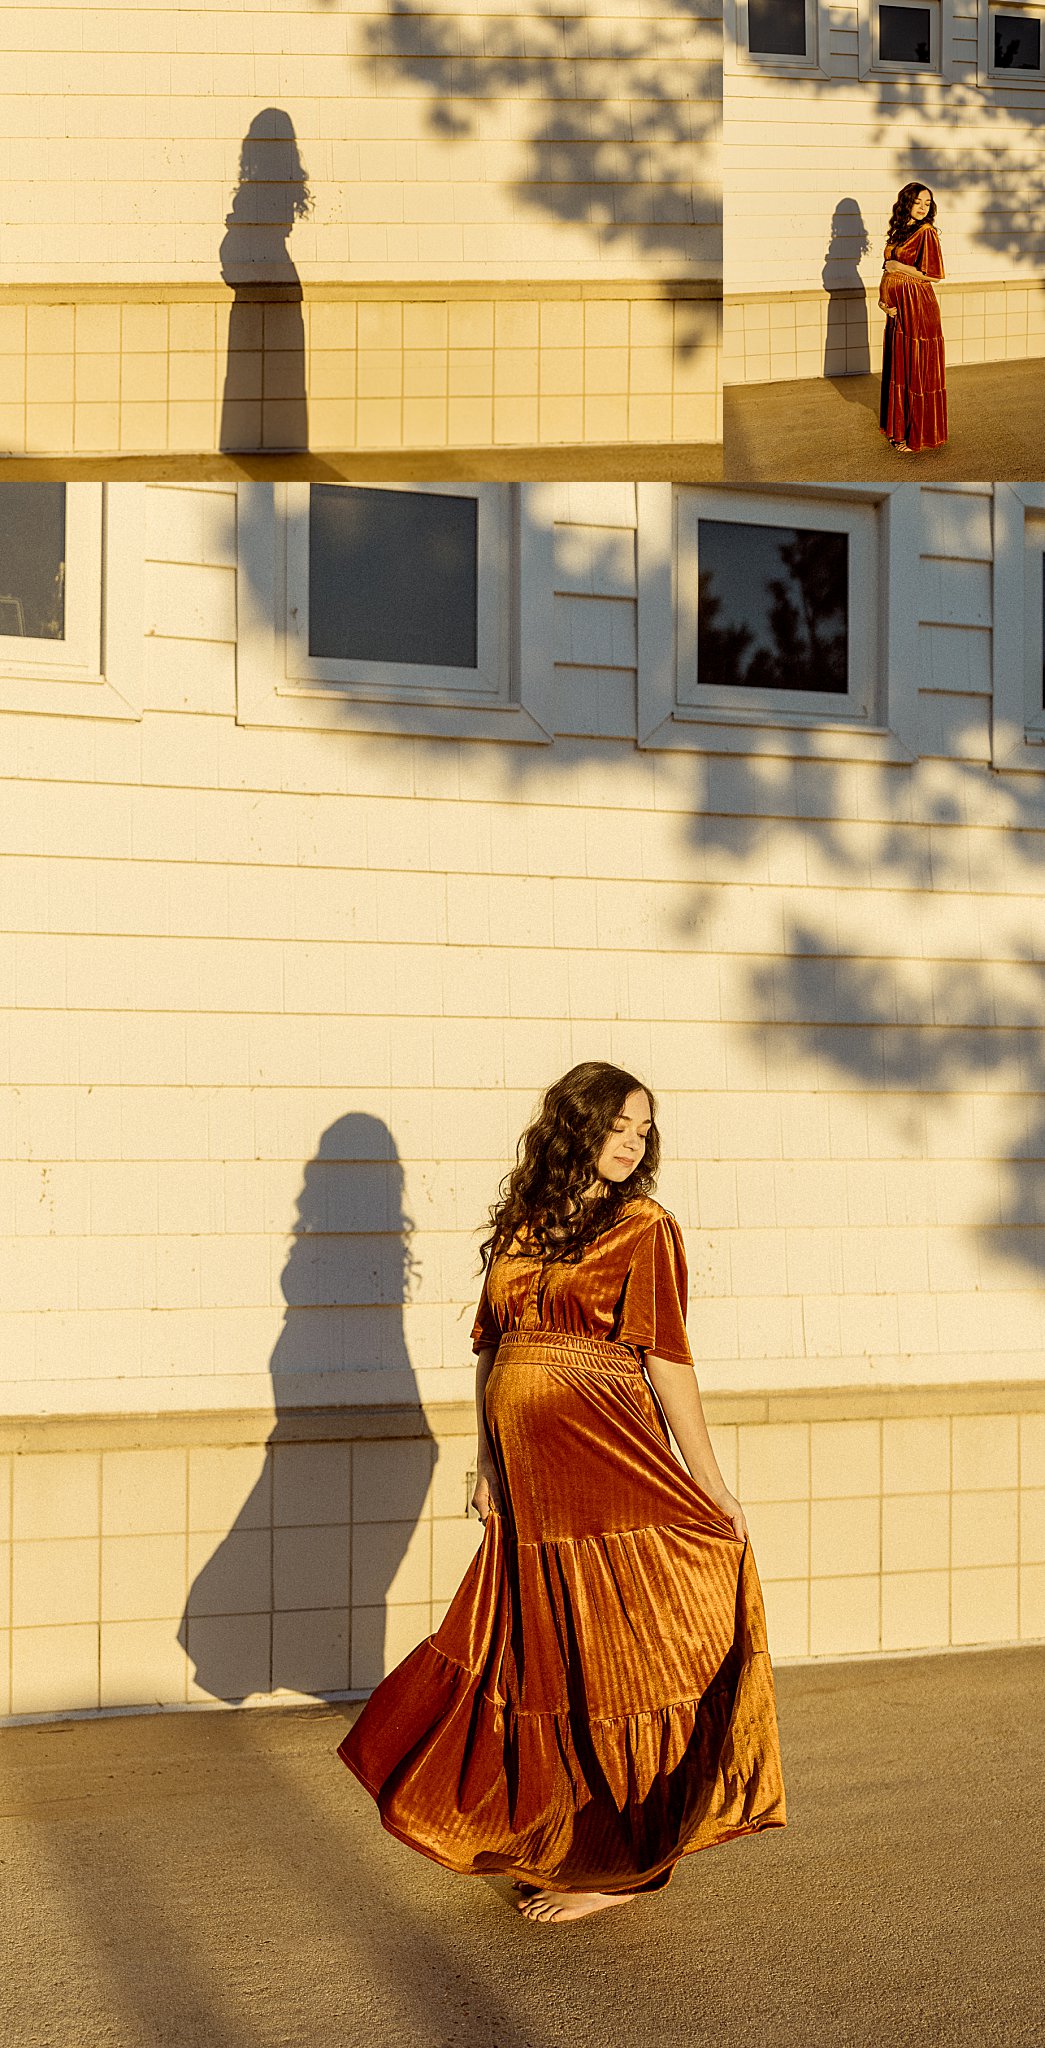 mom to be casts shadow of baby bump on building during Outdoor Maternity Session